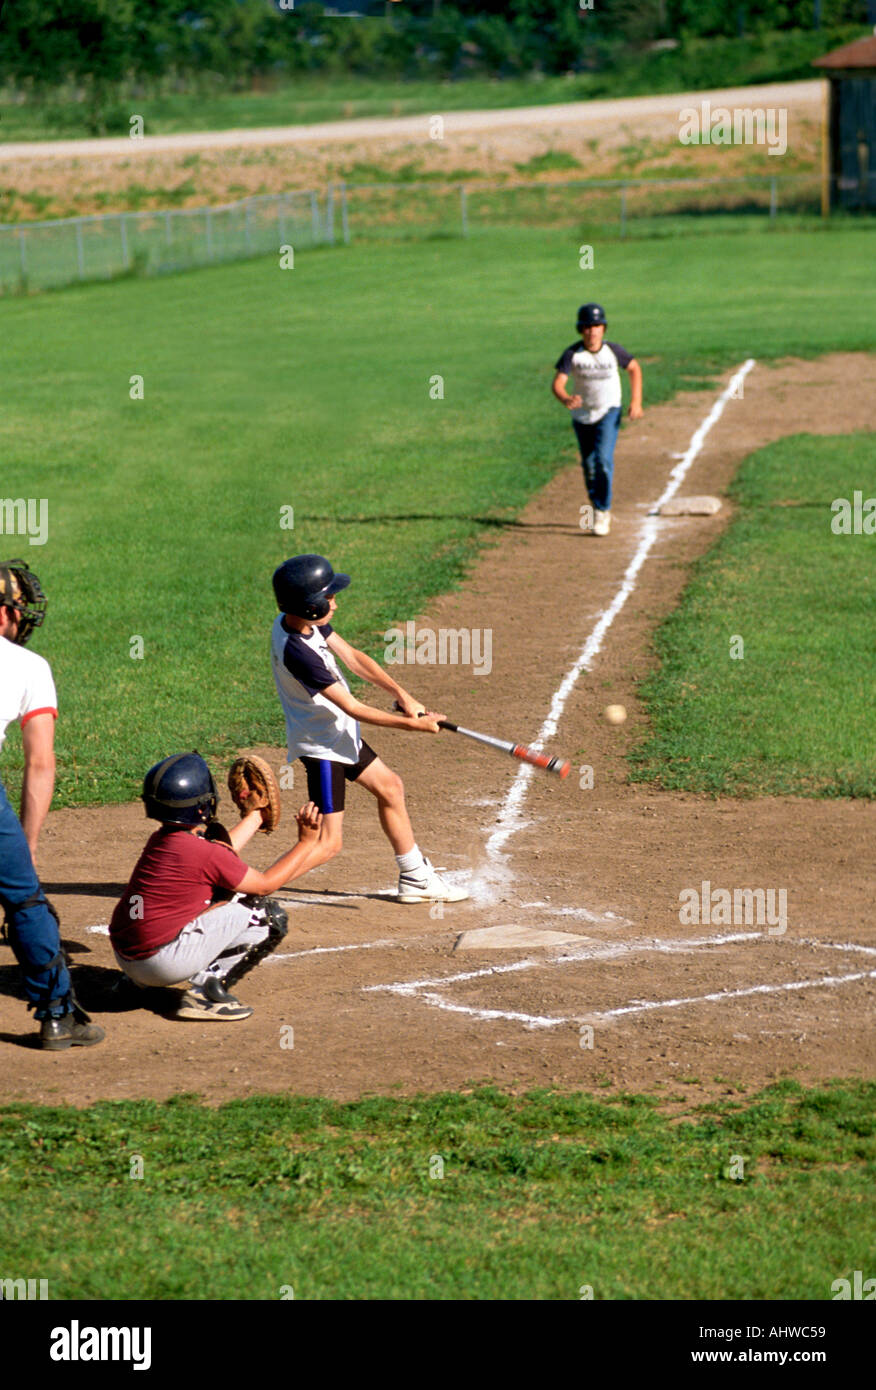 Little league action where the batter hits the ball and base runner is running Stock Photo